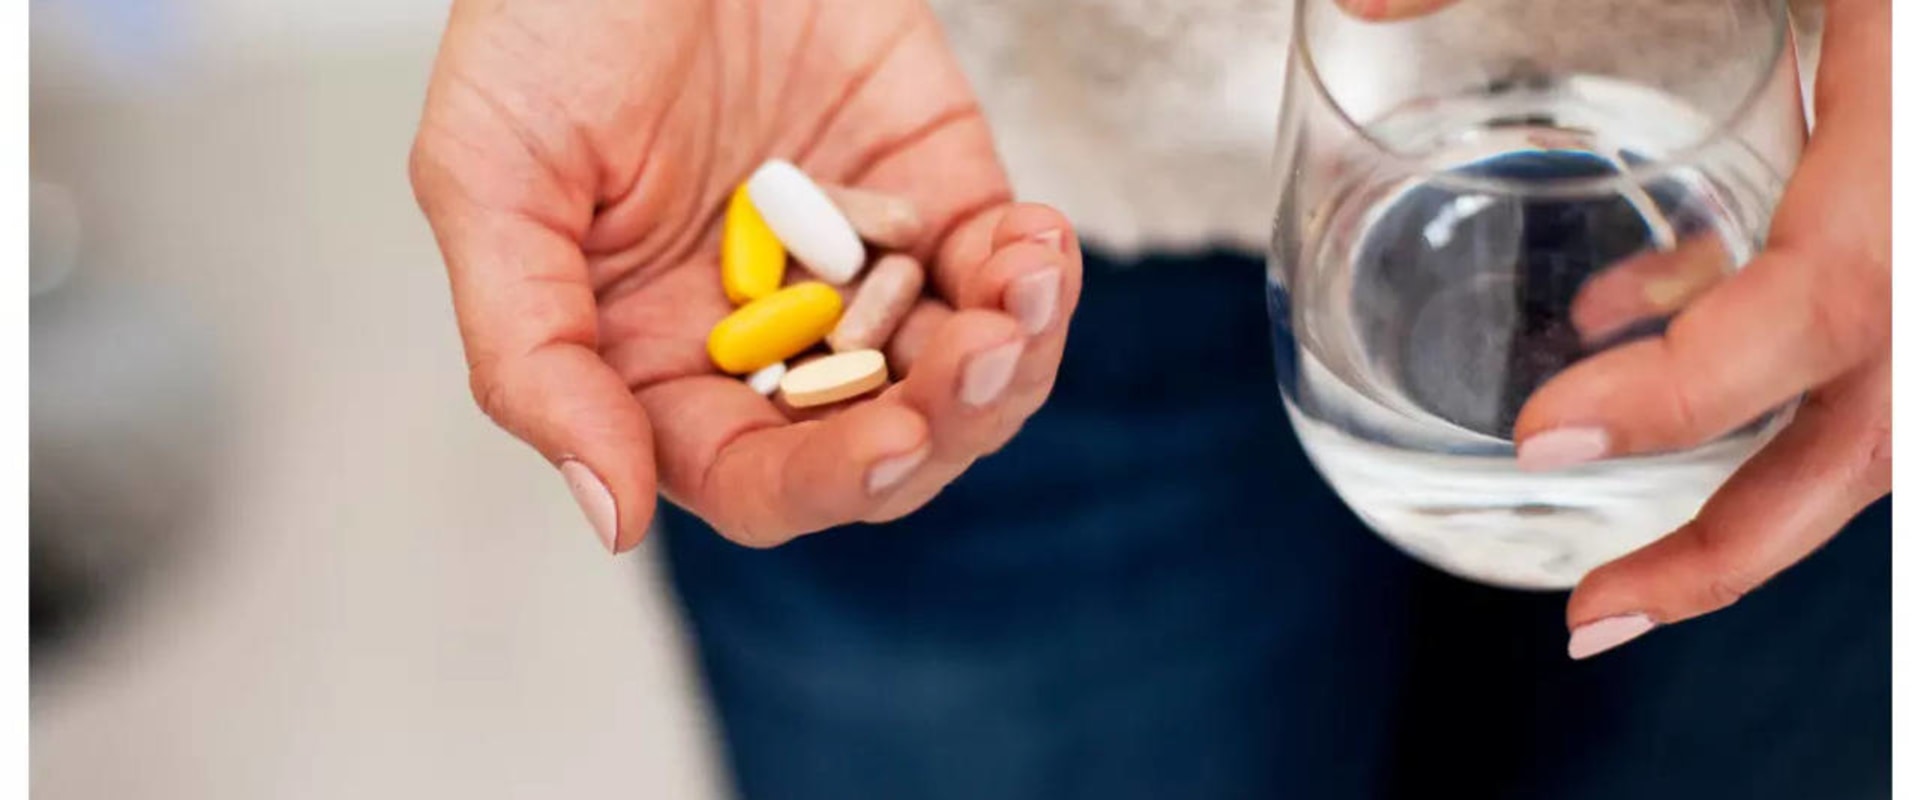 Is it Safe to Take Dietary Supplements? An Expert's Guide